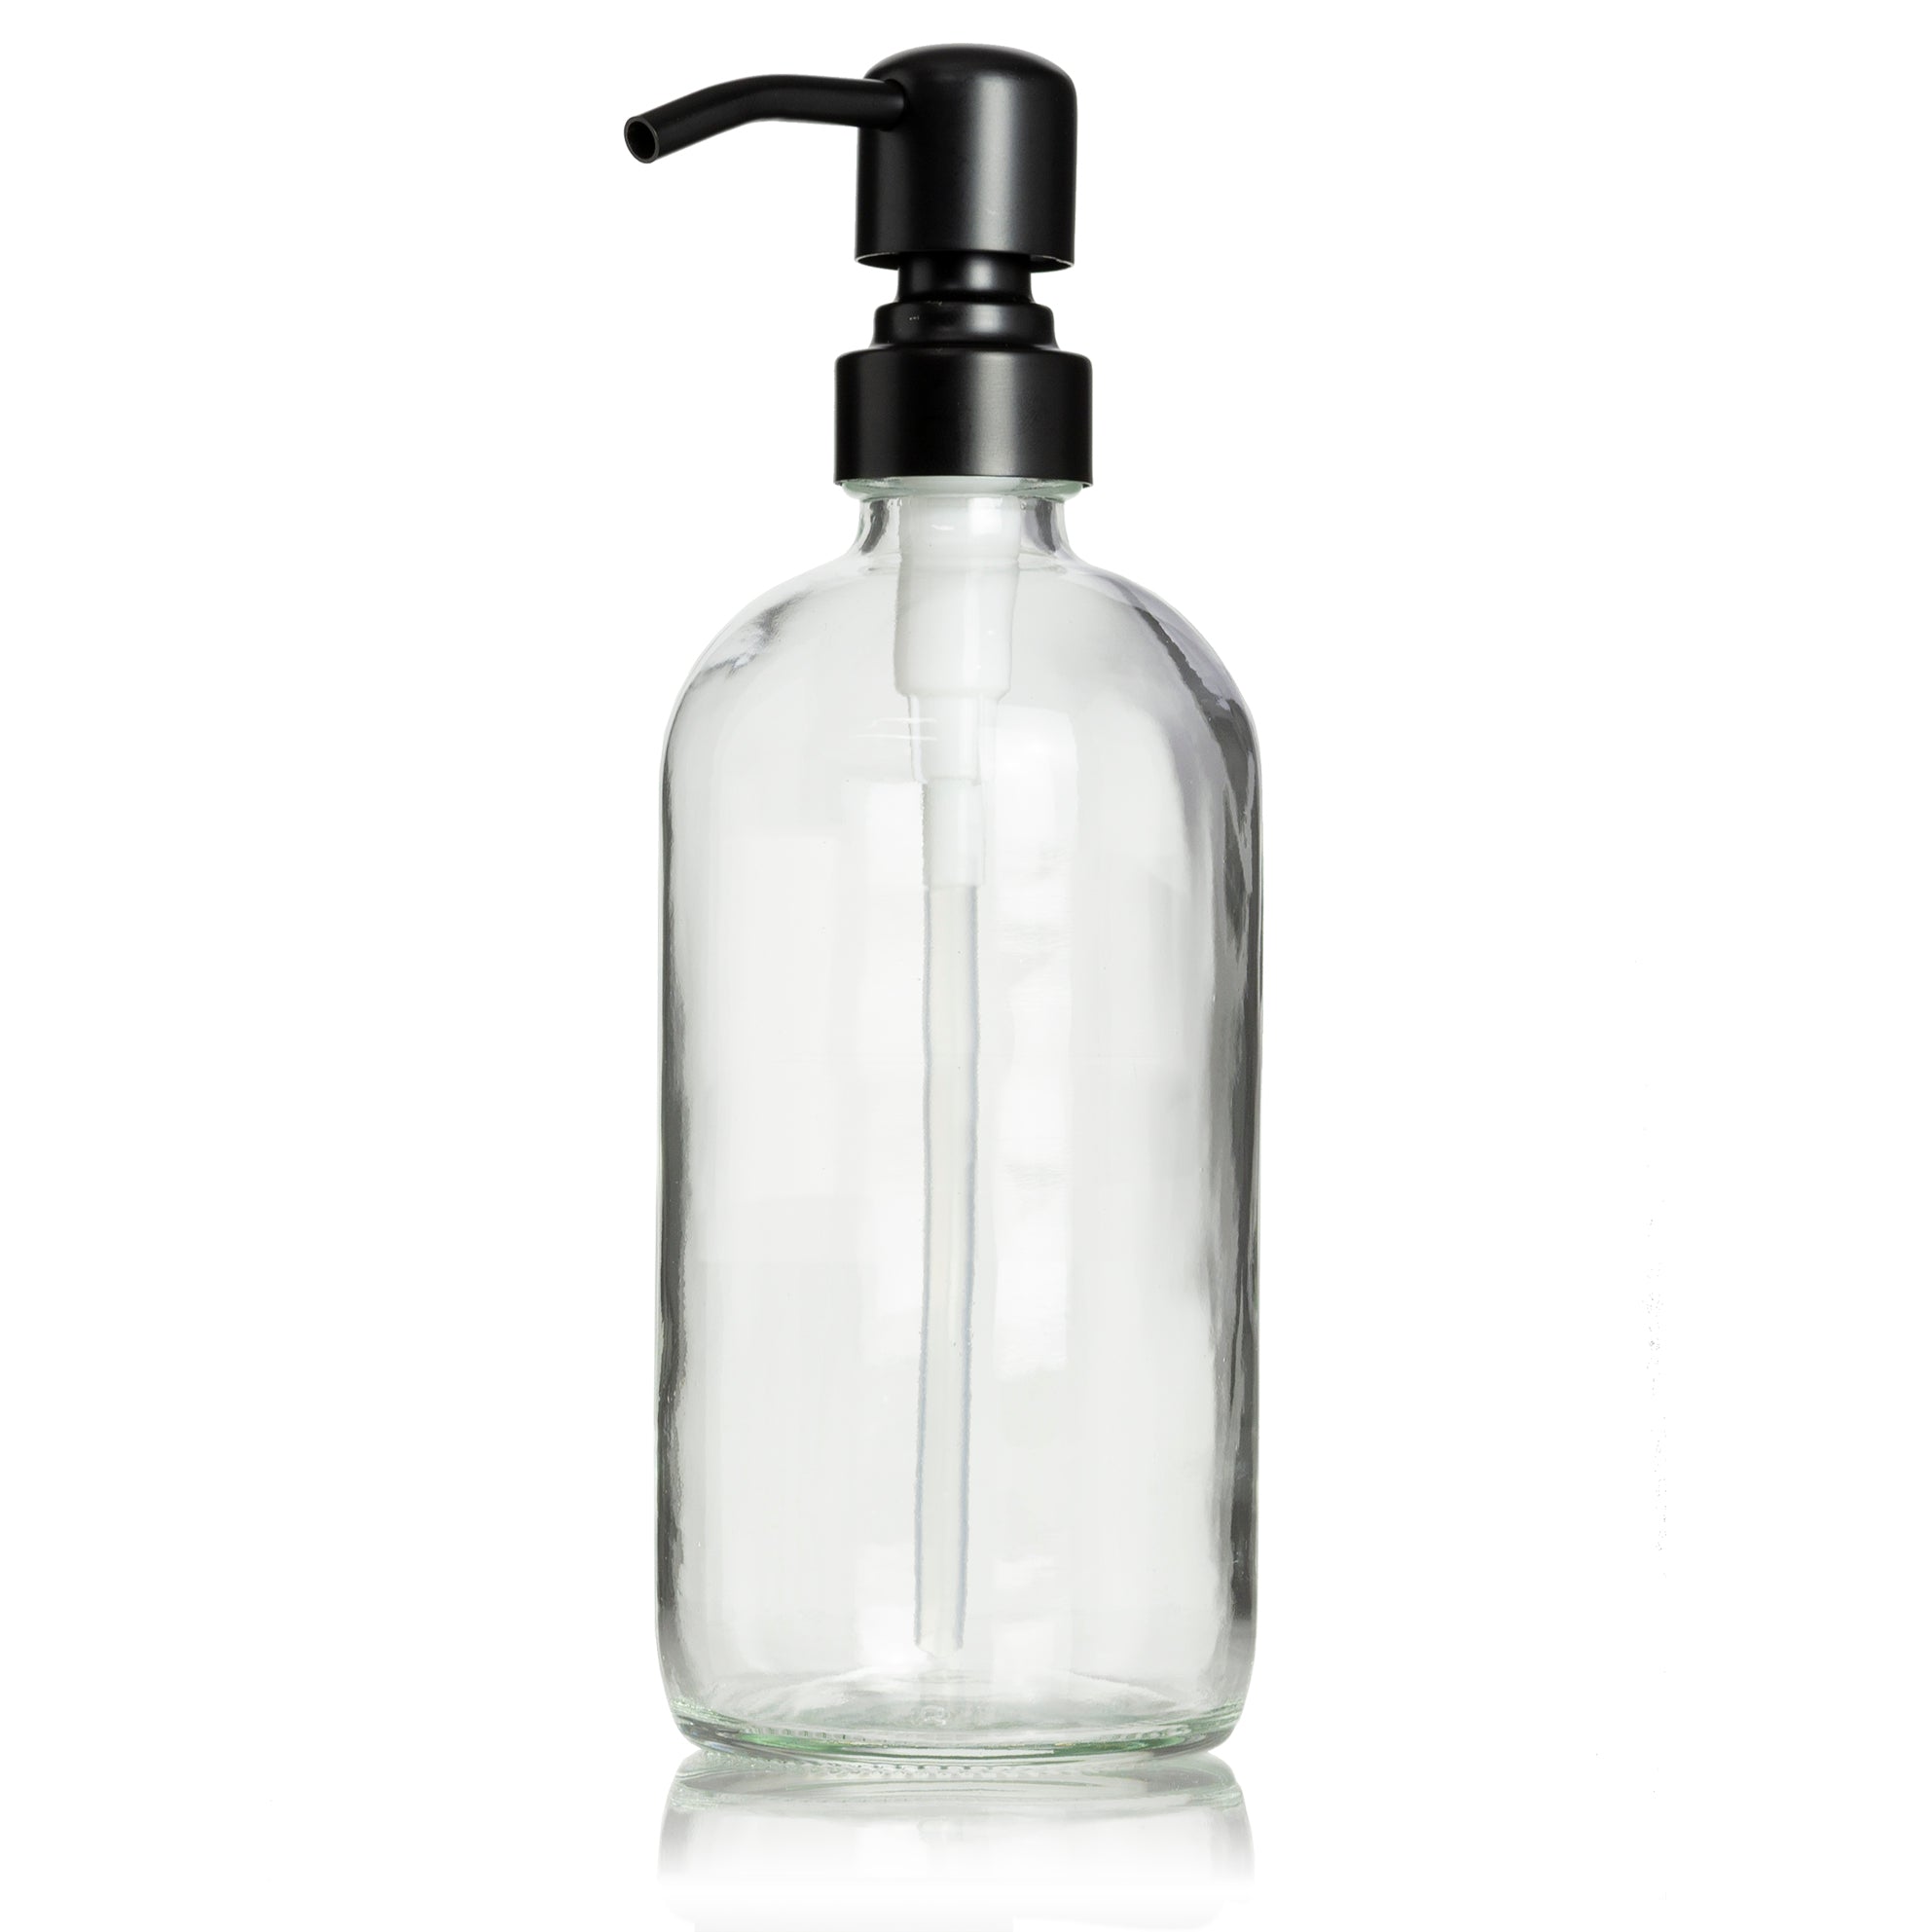 16oz Glass Bottle w/Stainless Steel Pump - Refillable, Reusable